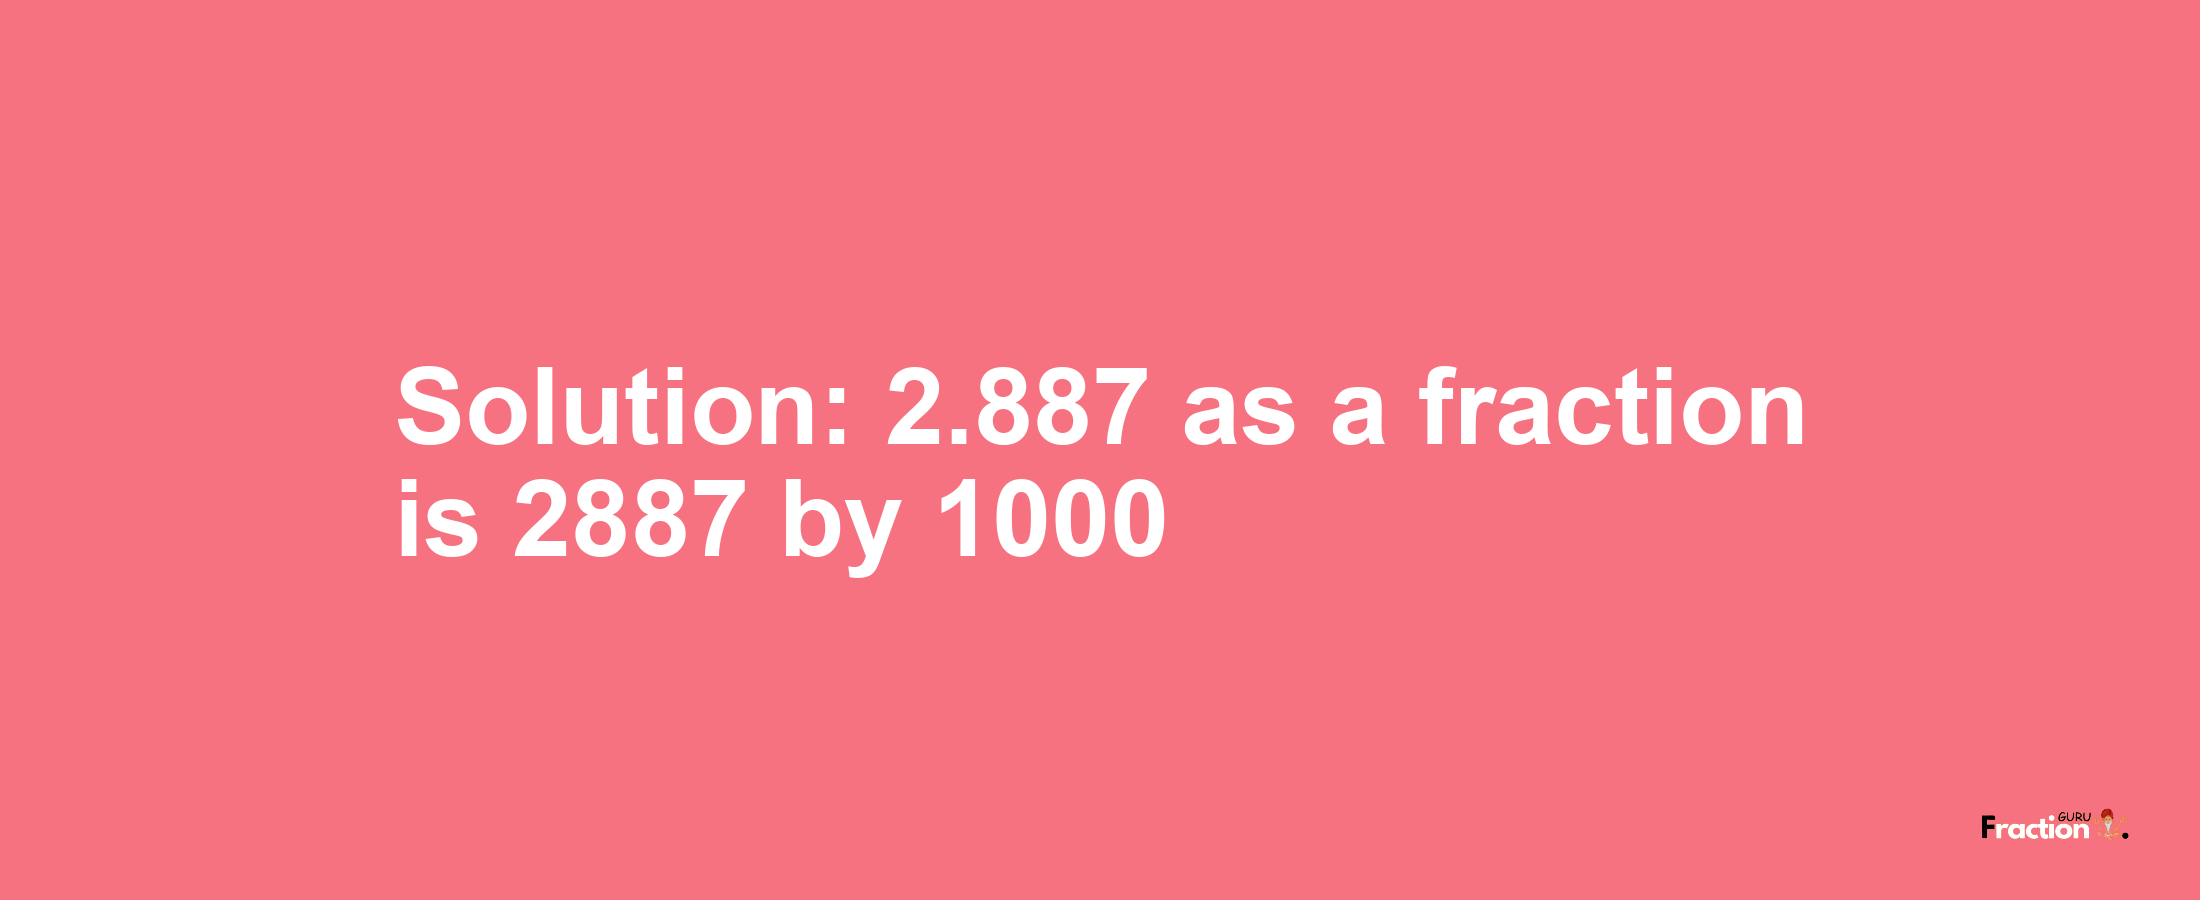 Solution:2.887 as a fraction is 2887/1000